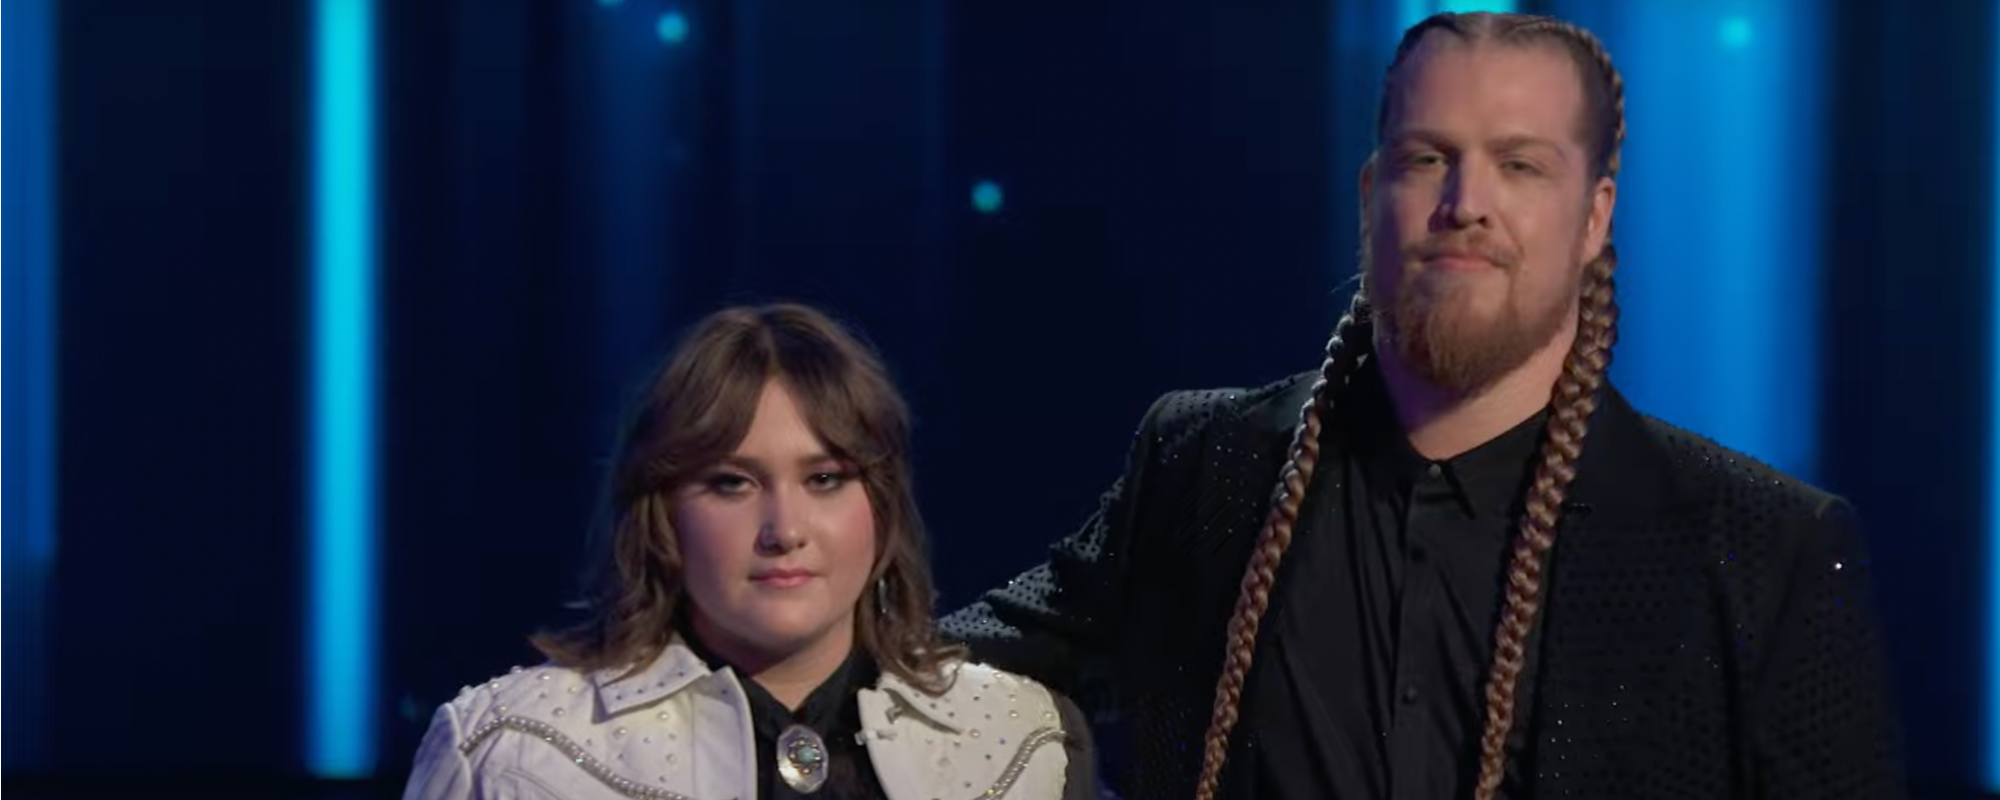 ‘The Voice’ Fans Irate After Show “Robbed” Ruby Leigh and Mara Justine for Win: “Call the Cops”